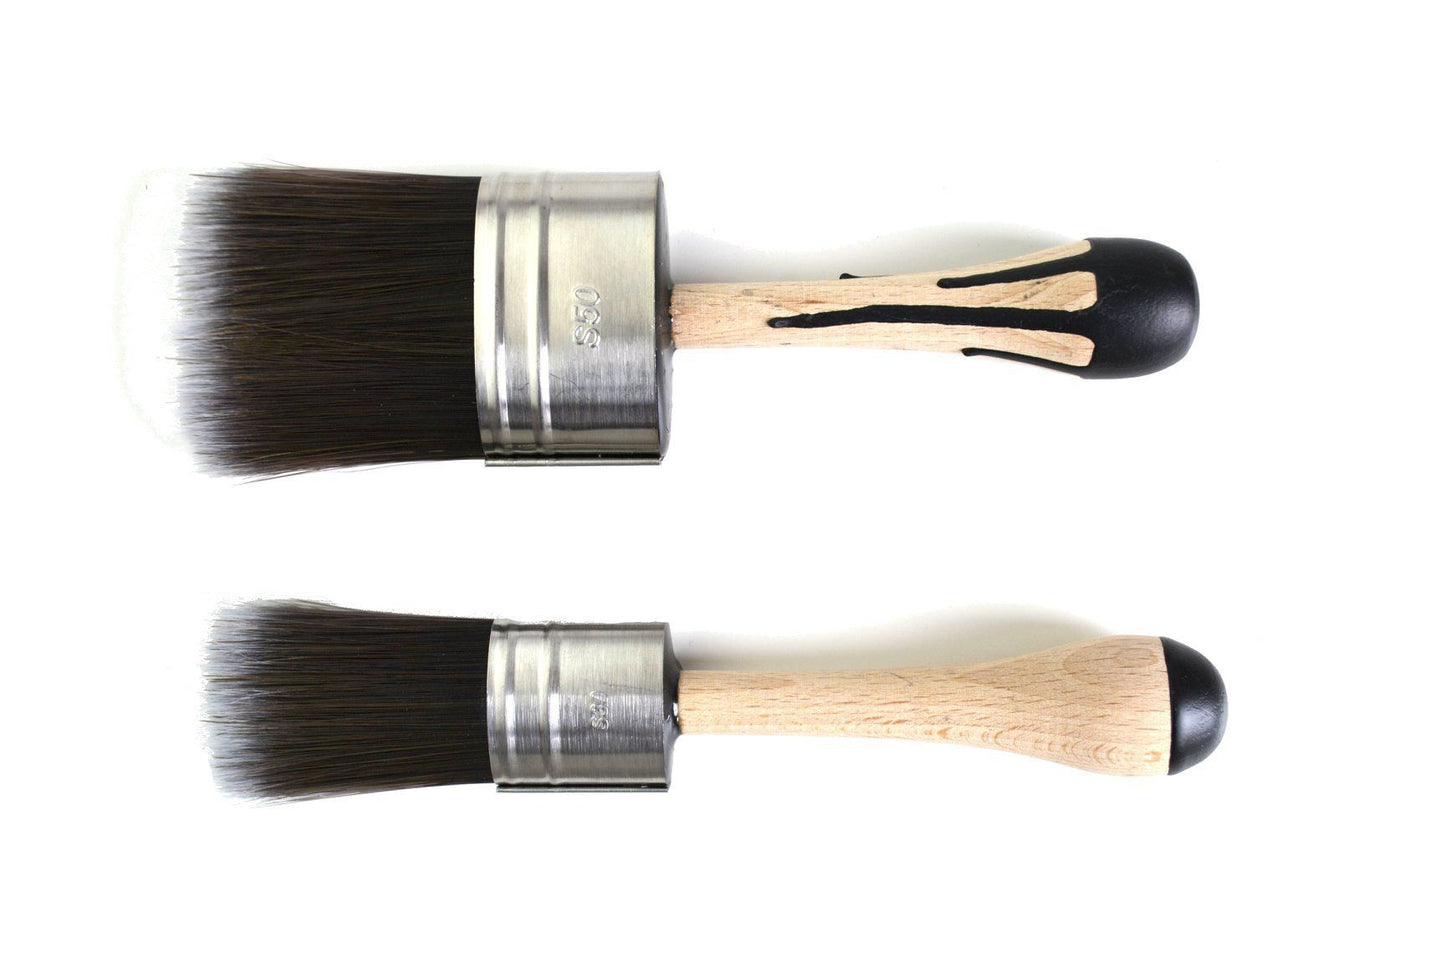 CLING ON Furniture Paint Brush S50 Short Synthetic